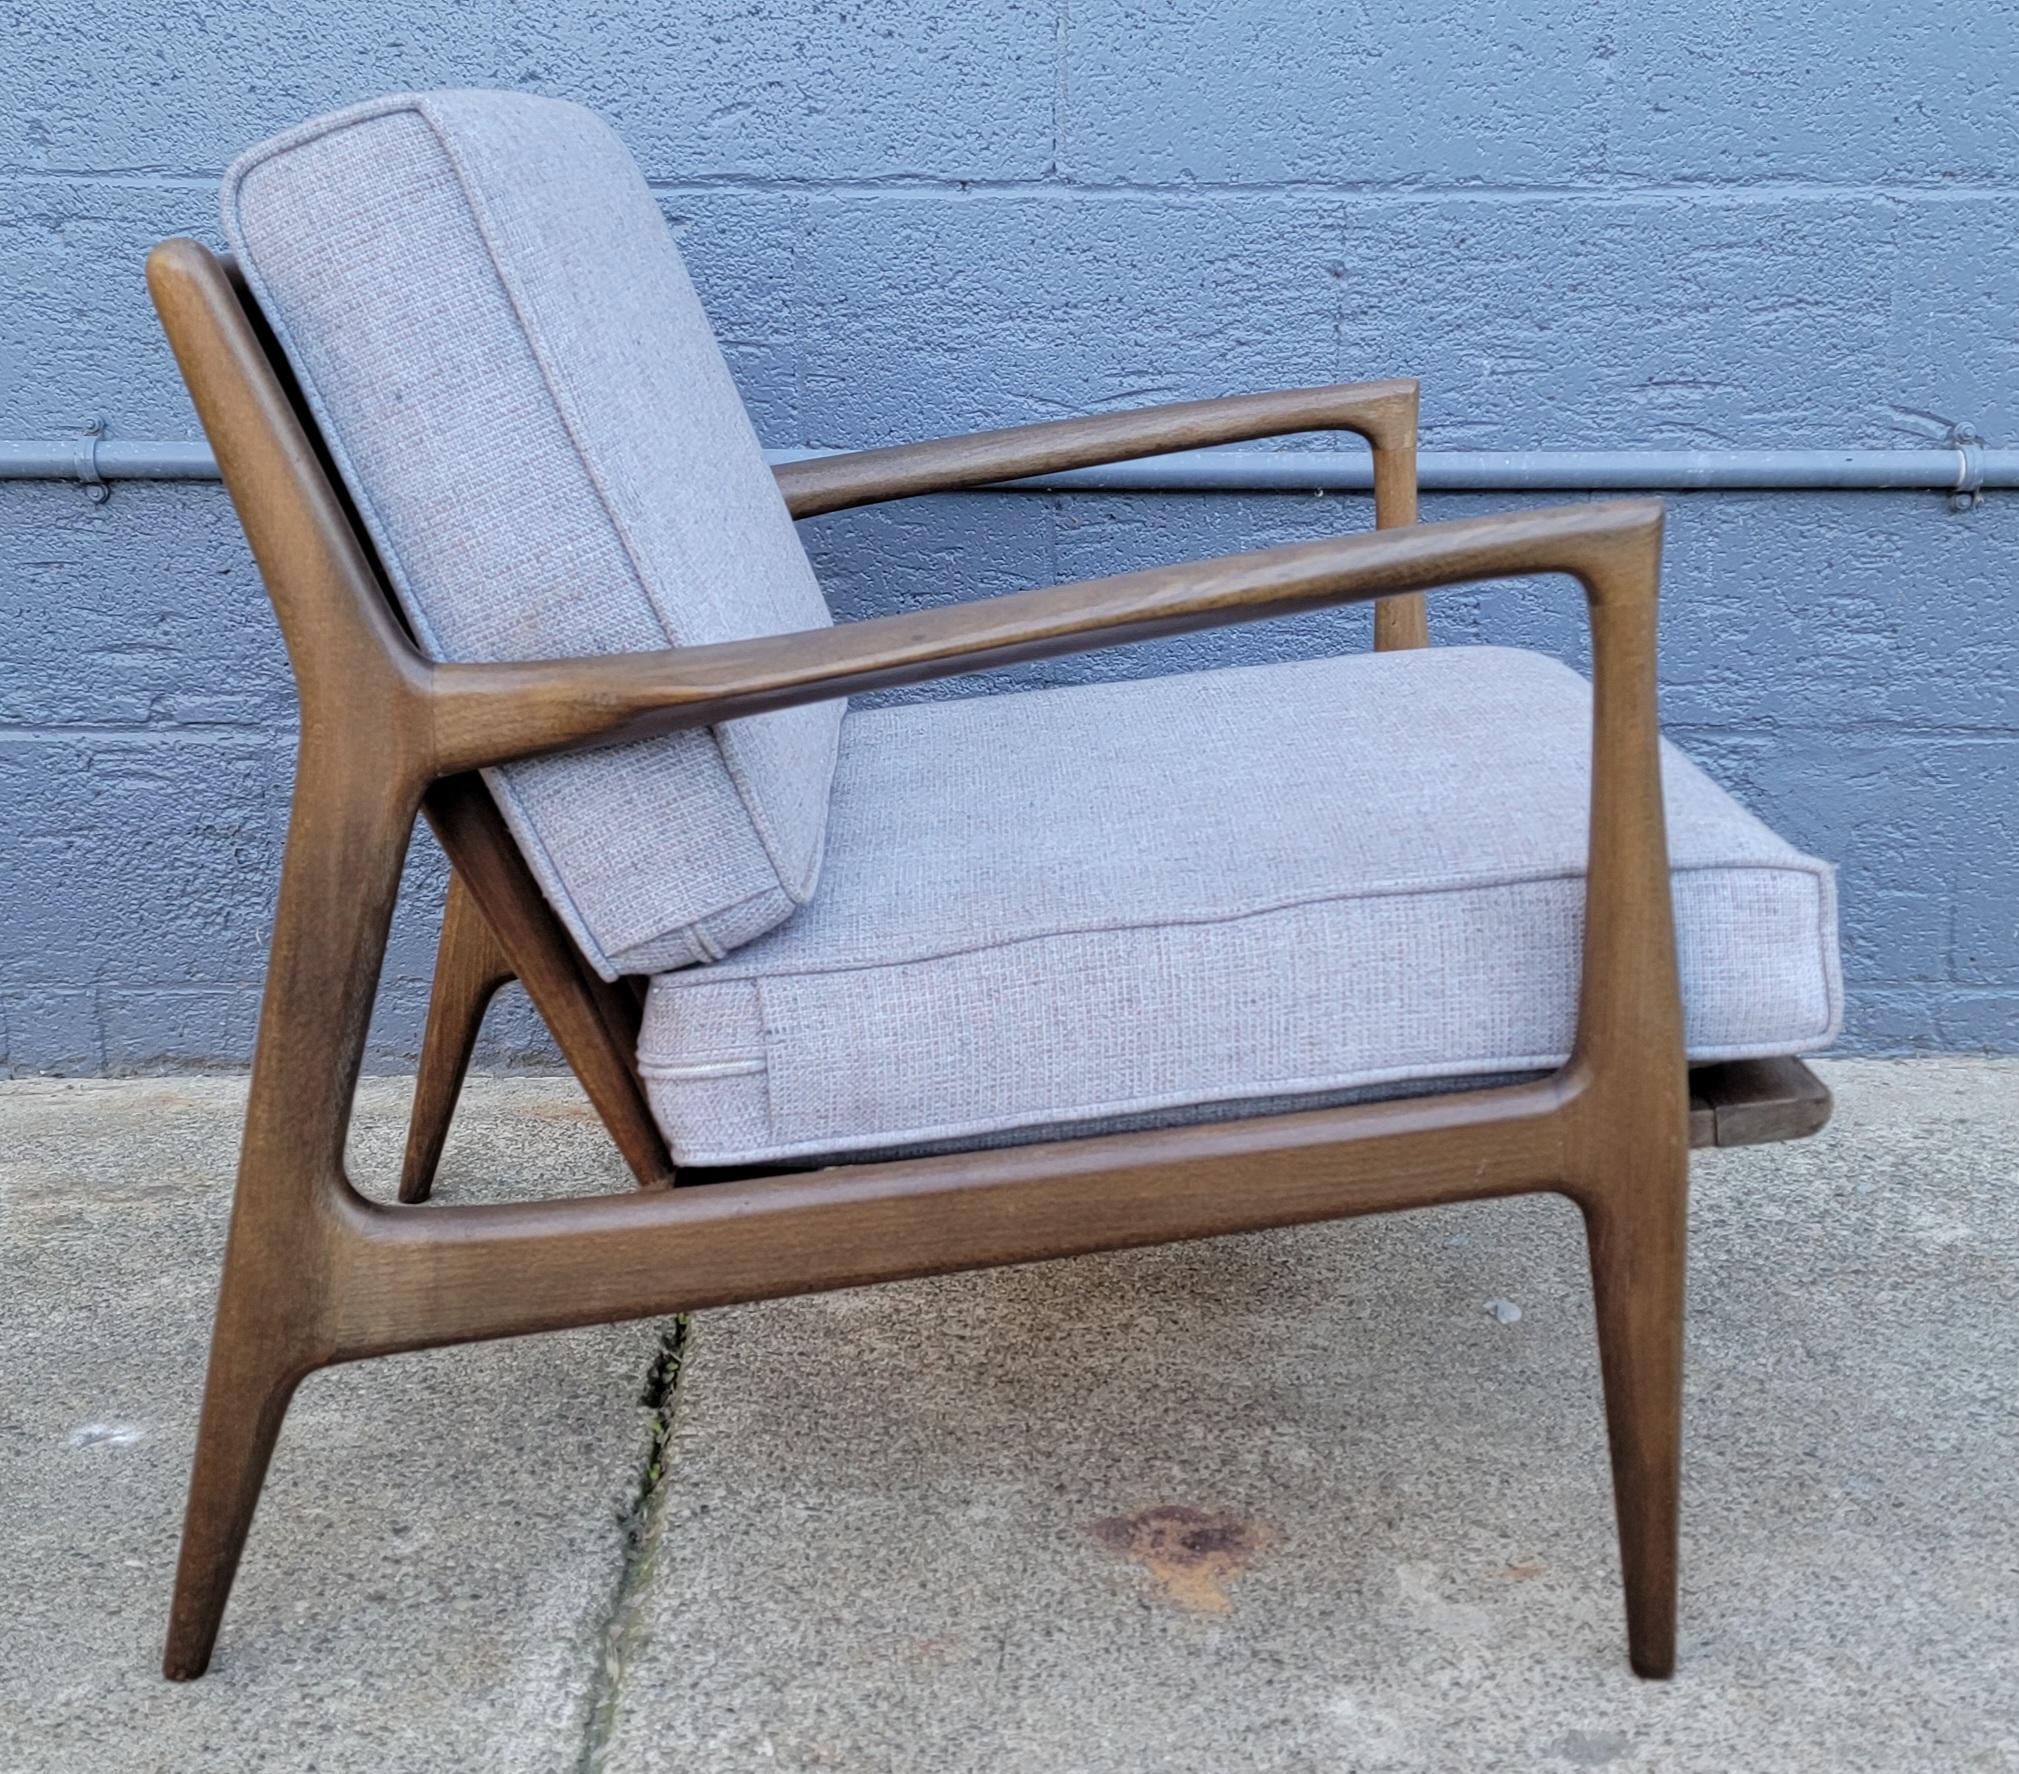 Iconic Danish Modern lounge chair designed by Ib Kofod-Larsen, Denmark 1960's. Original finish with fade and discoloration, older re-upholstery to reversible cushions in good condition. Fagas straps show signs of wear and some sagging. Structurally